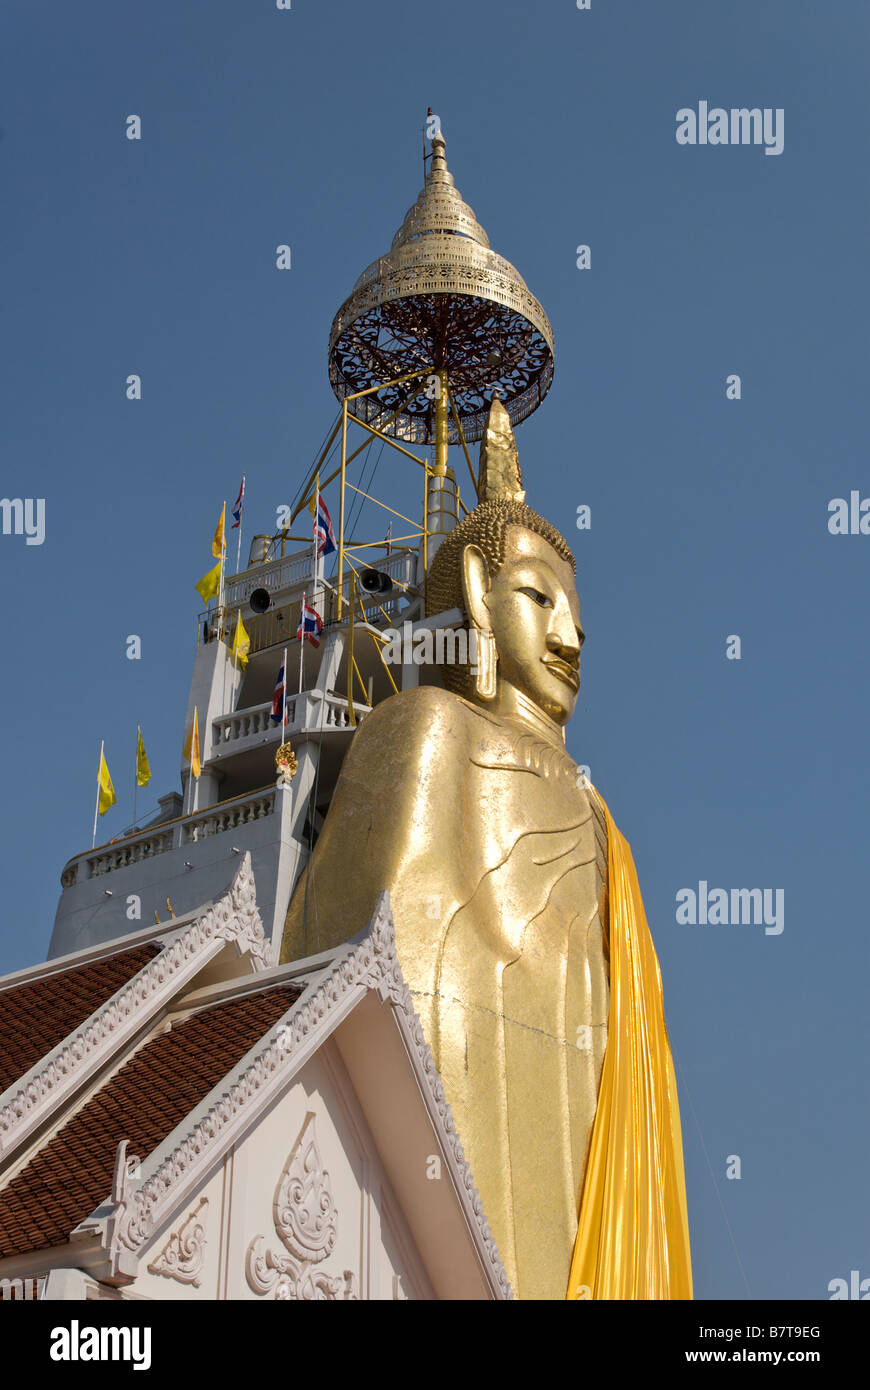 32m golden standing buddha buddhist temple Wat Intharavihan in Dusit district of Bangkok in Thailand Stock Photo